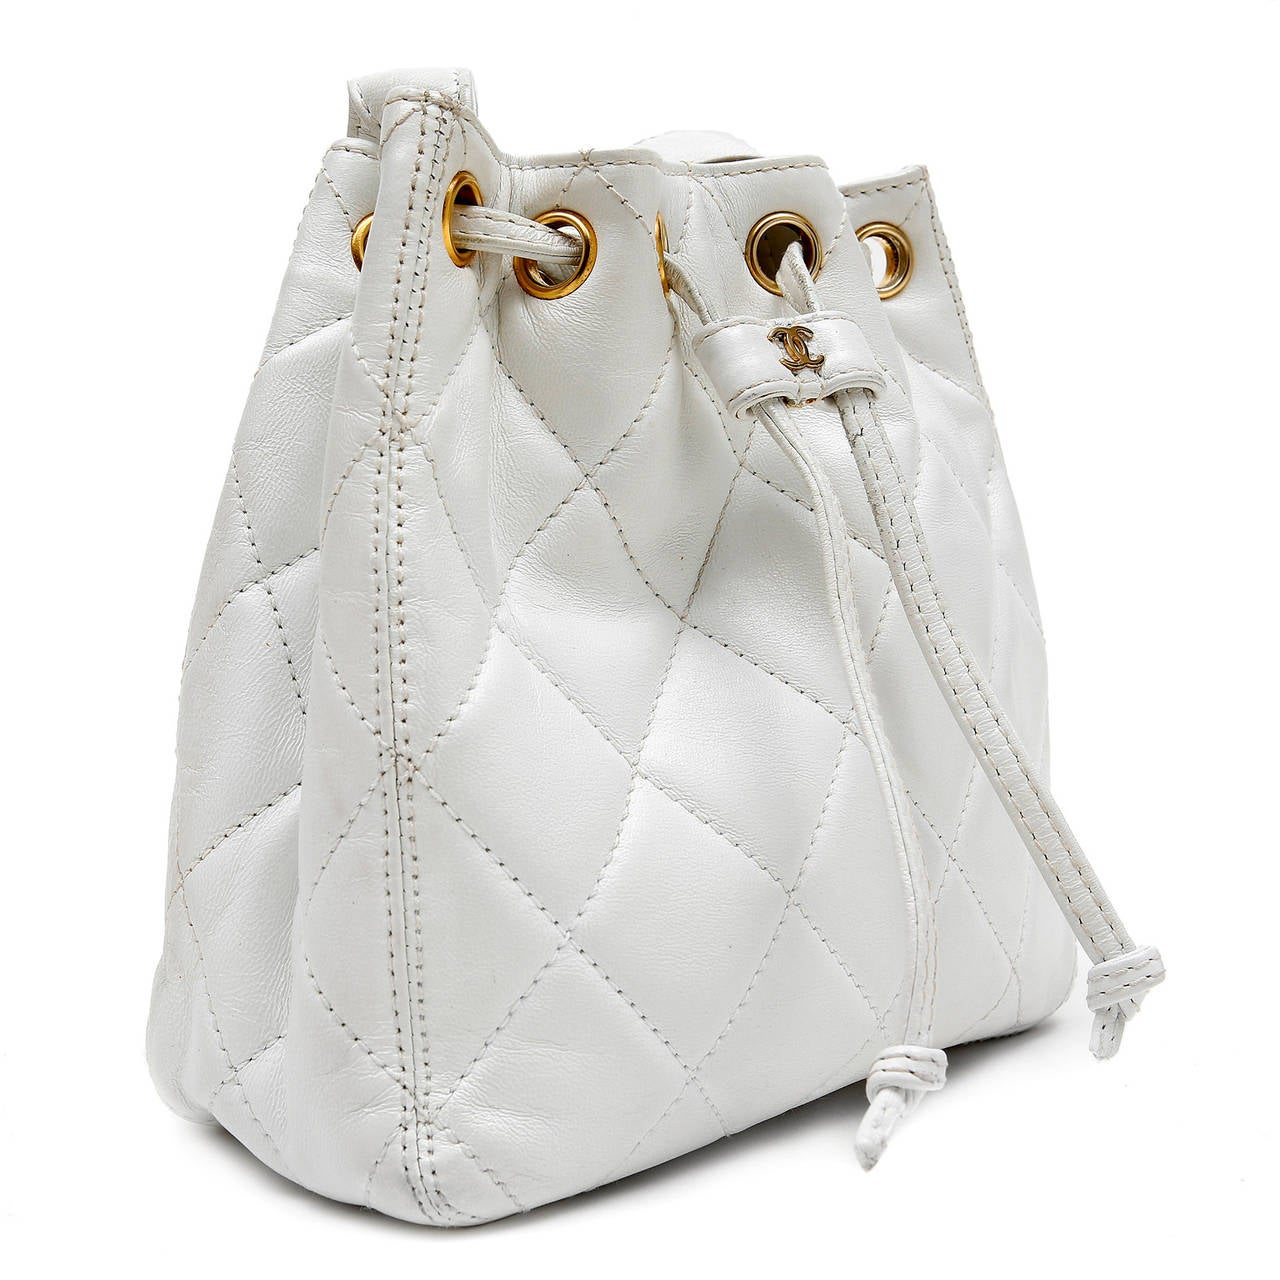 Chanel White Lambskin Drawstring Bucket Bag- Excellent Plus
Petite in stature, the classic bucket style is perfect for traveling with just the essentials. 
 
White lambskin is quilted in signature Chanel diamond stitched pattern.  Leather draw